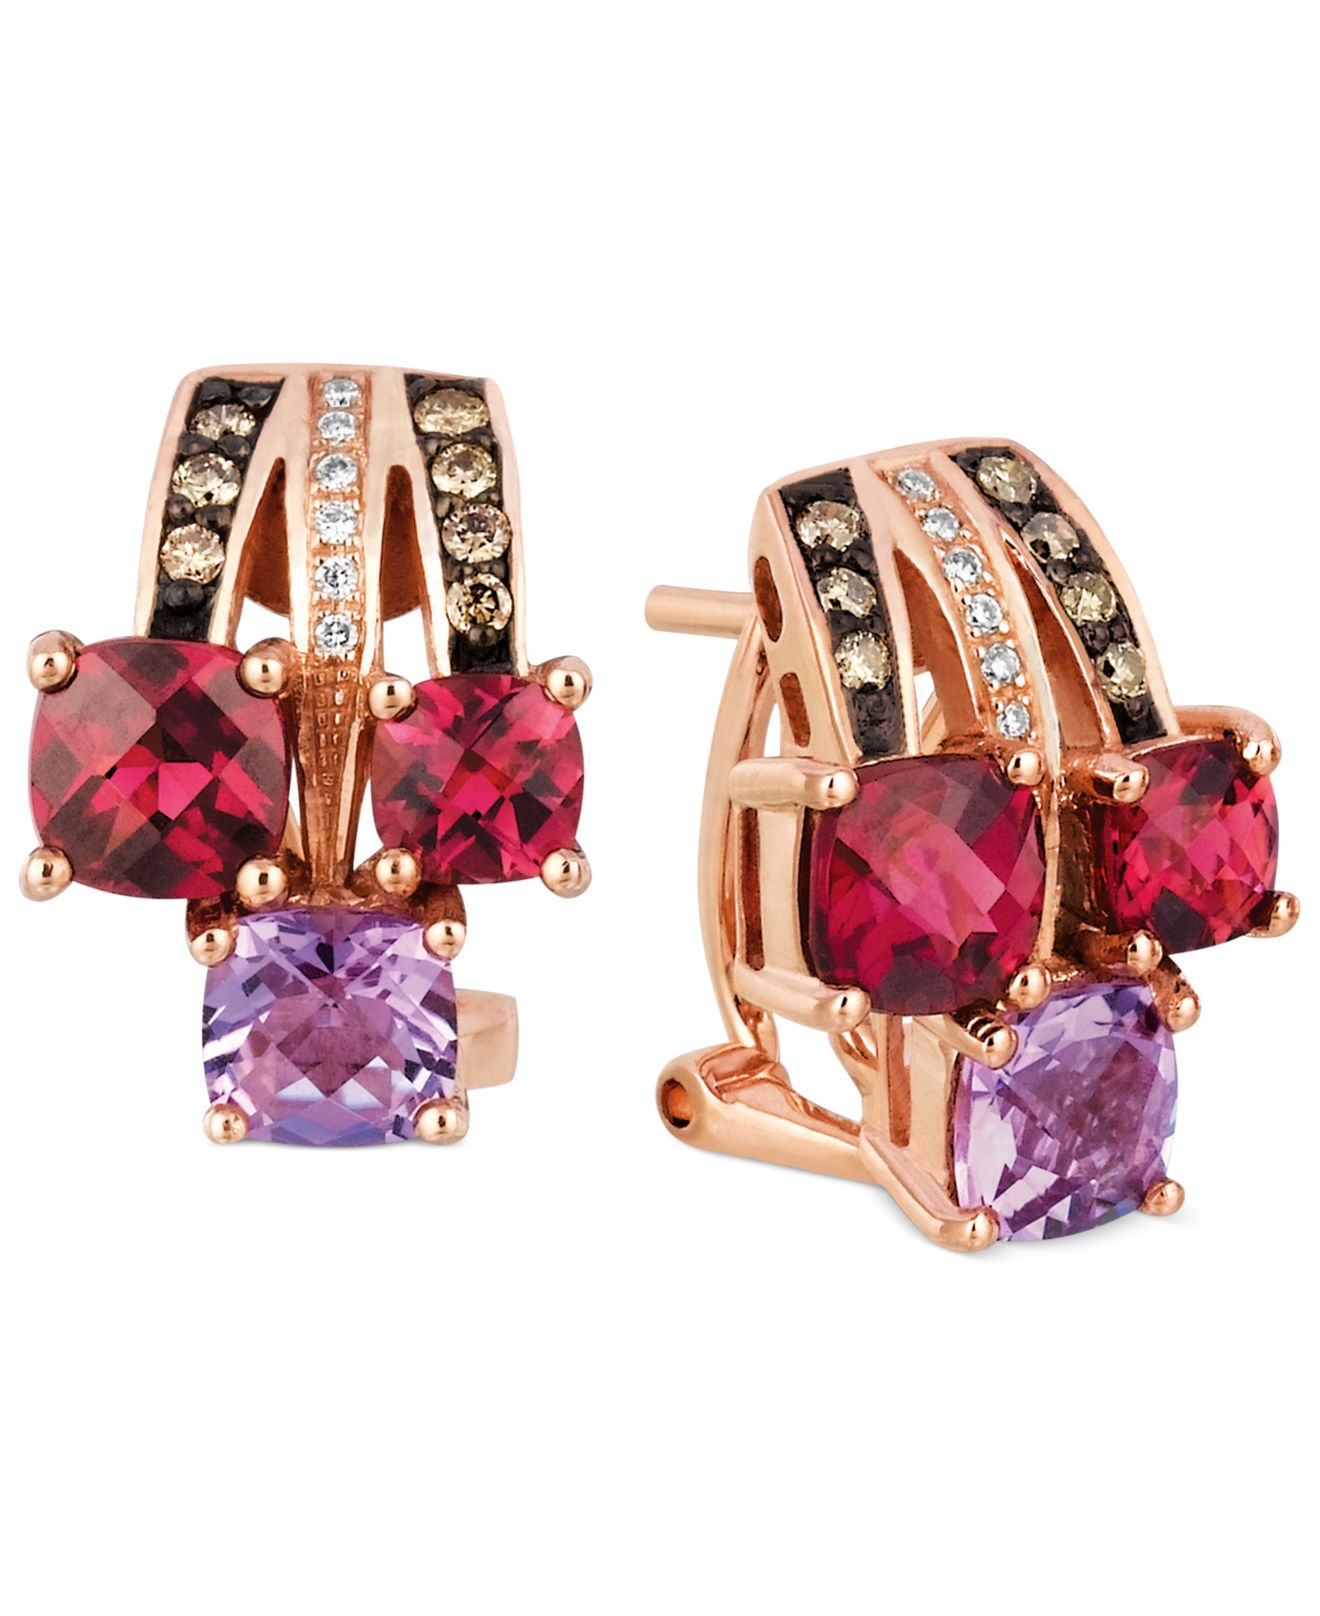 Le Vian Chocolate Diamond (1/6 Ct. Tw.) And Diamond Accent Earrings In 14k Rose Gold in Pink